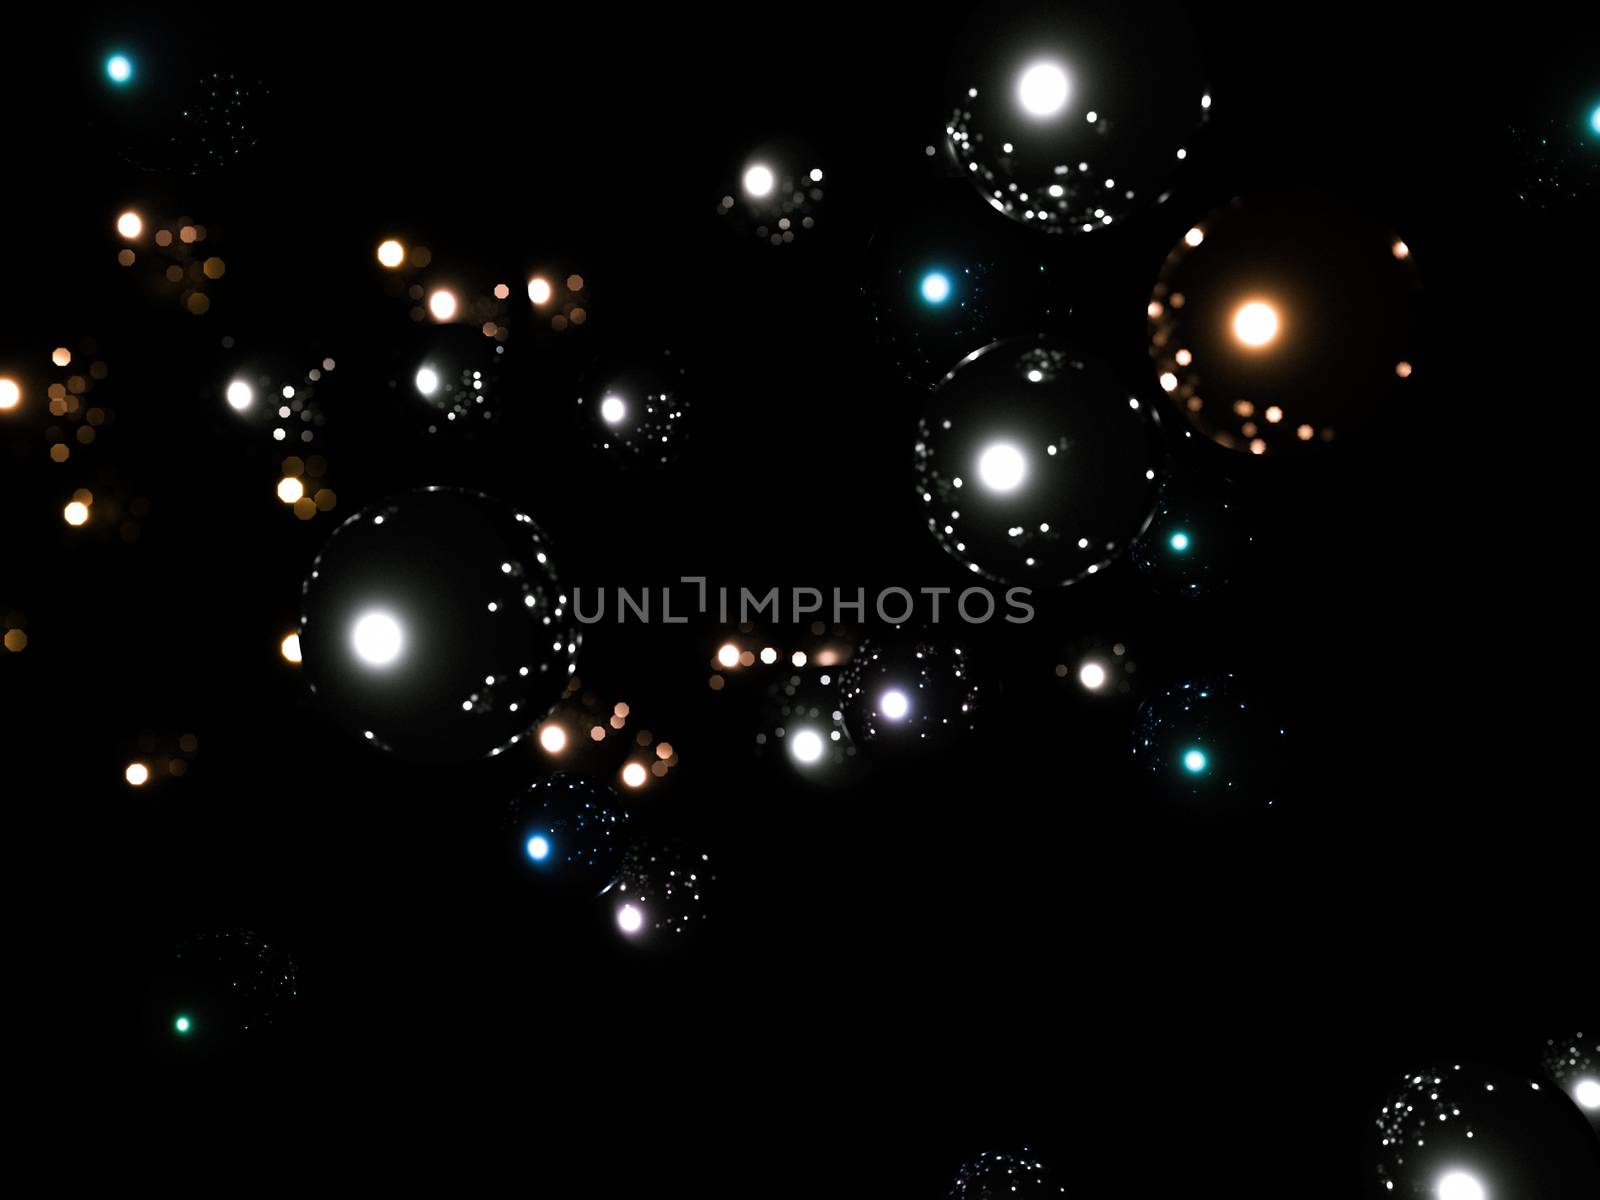 Abstract blurred reflective metallic spheres hanging in the air with bokeh effect on dark background